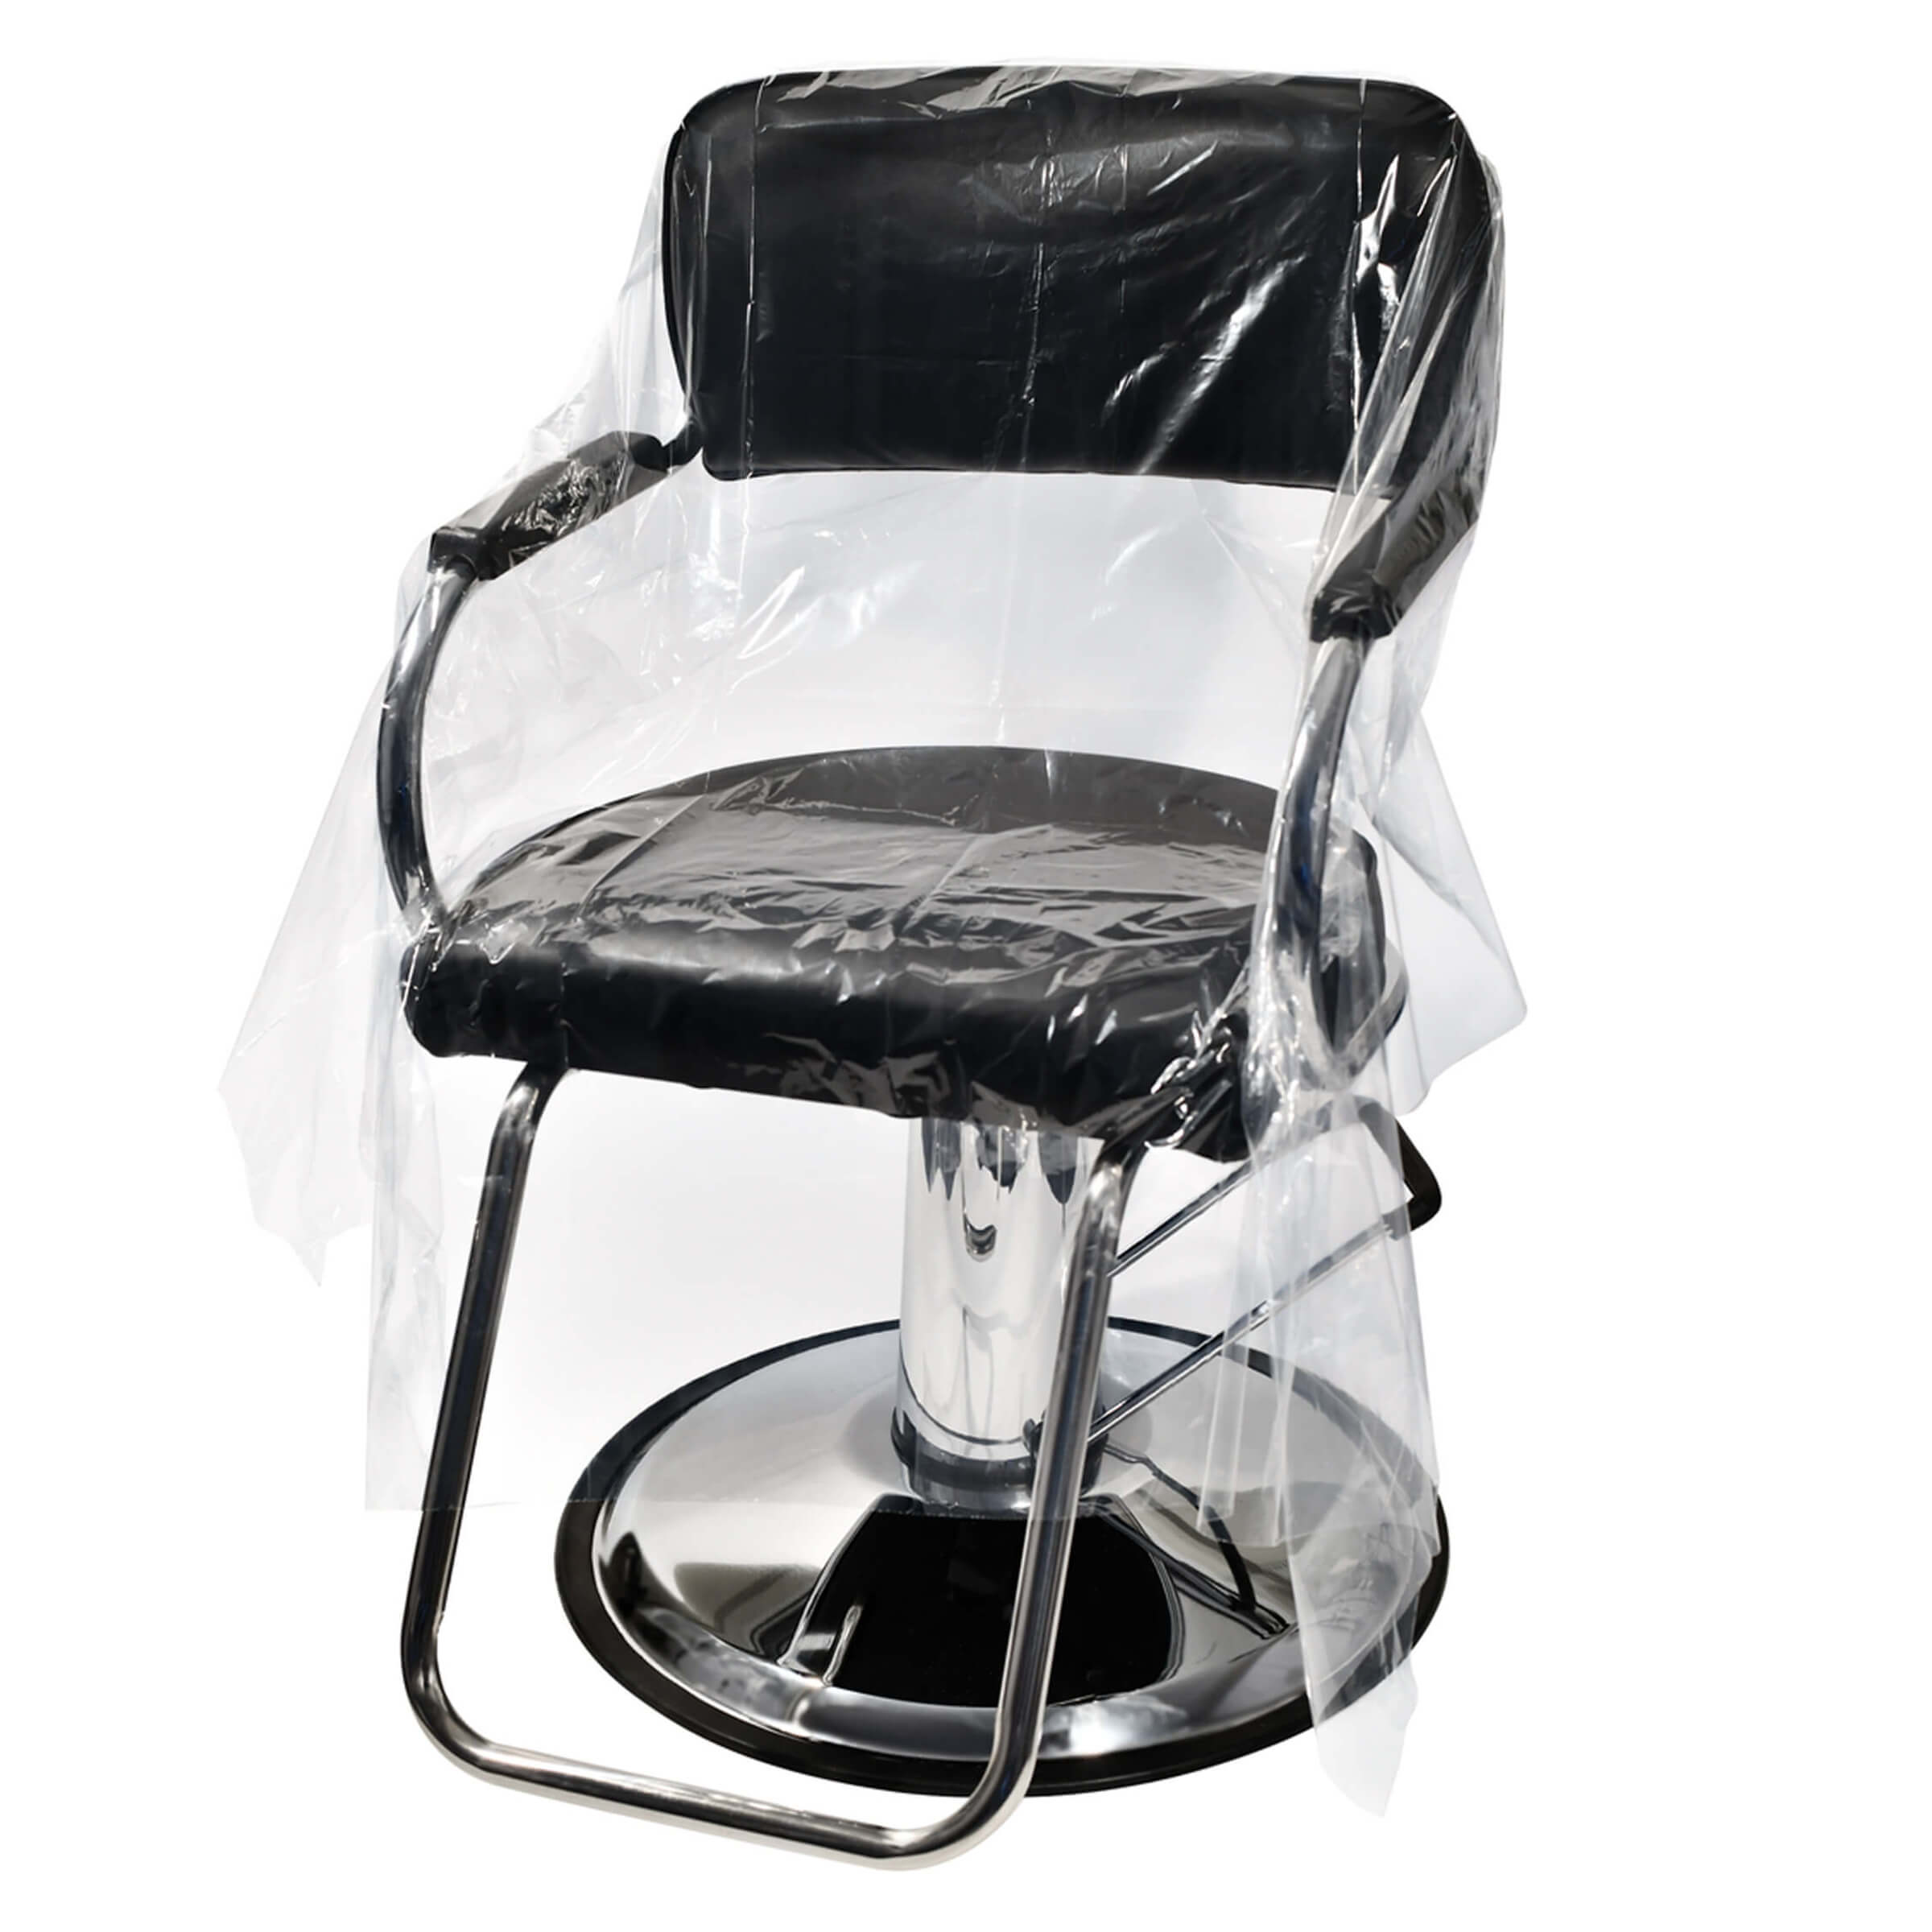 DCC-ROLL-a-salon-chair-covers-disposable-l.jpg